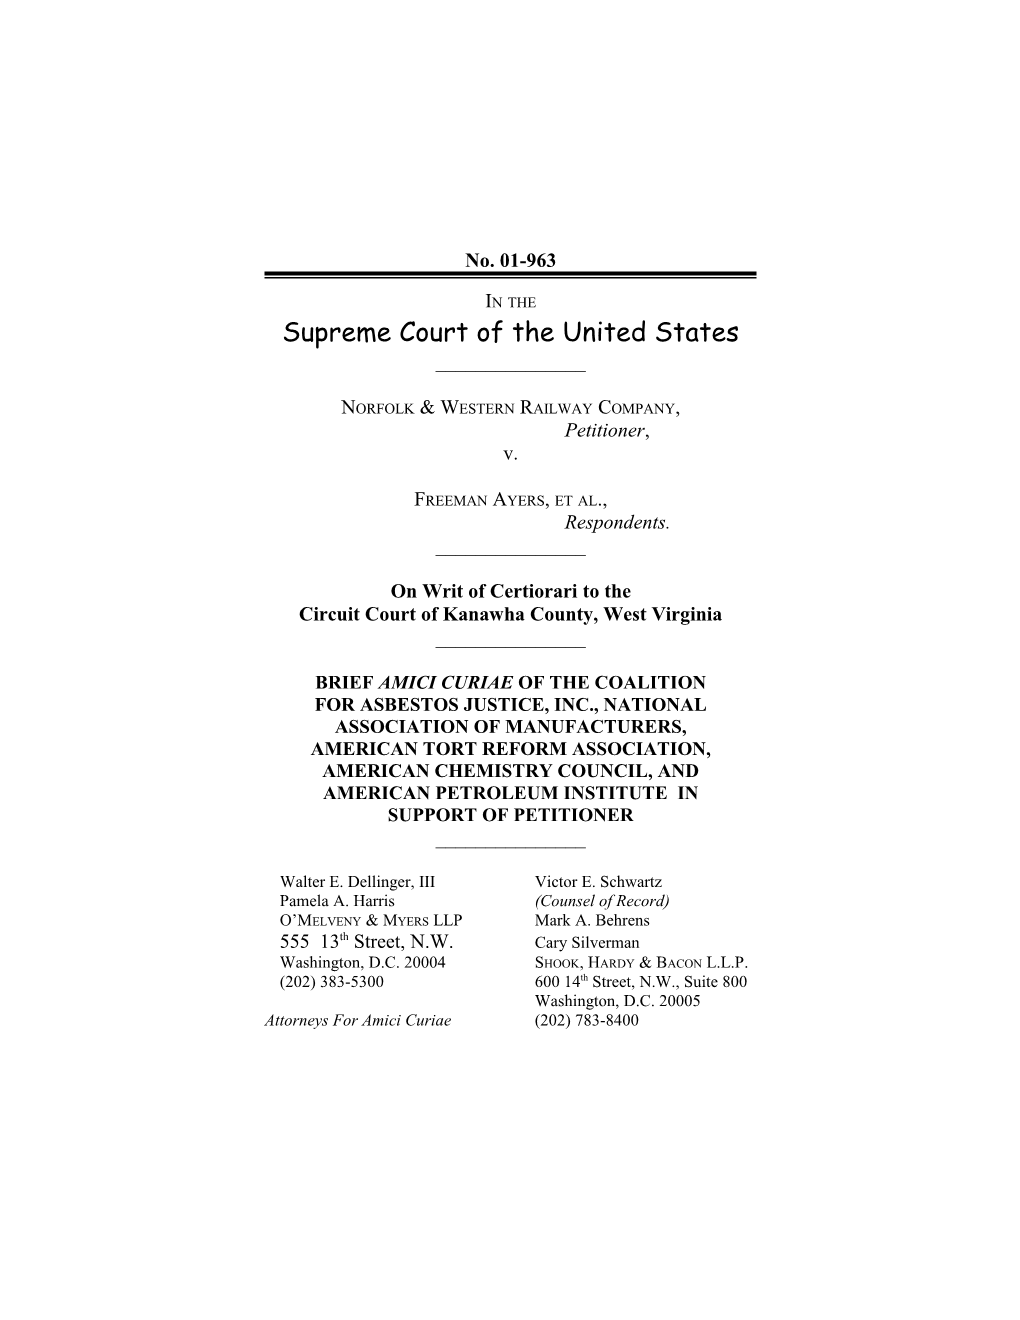 Supreme Court of the United States s6